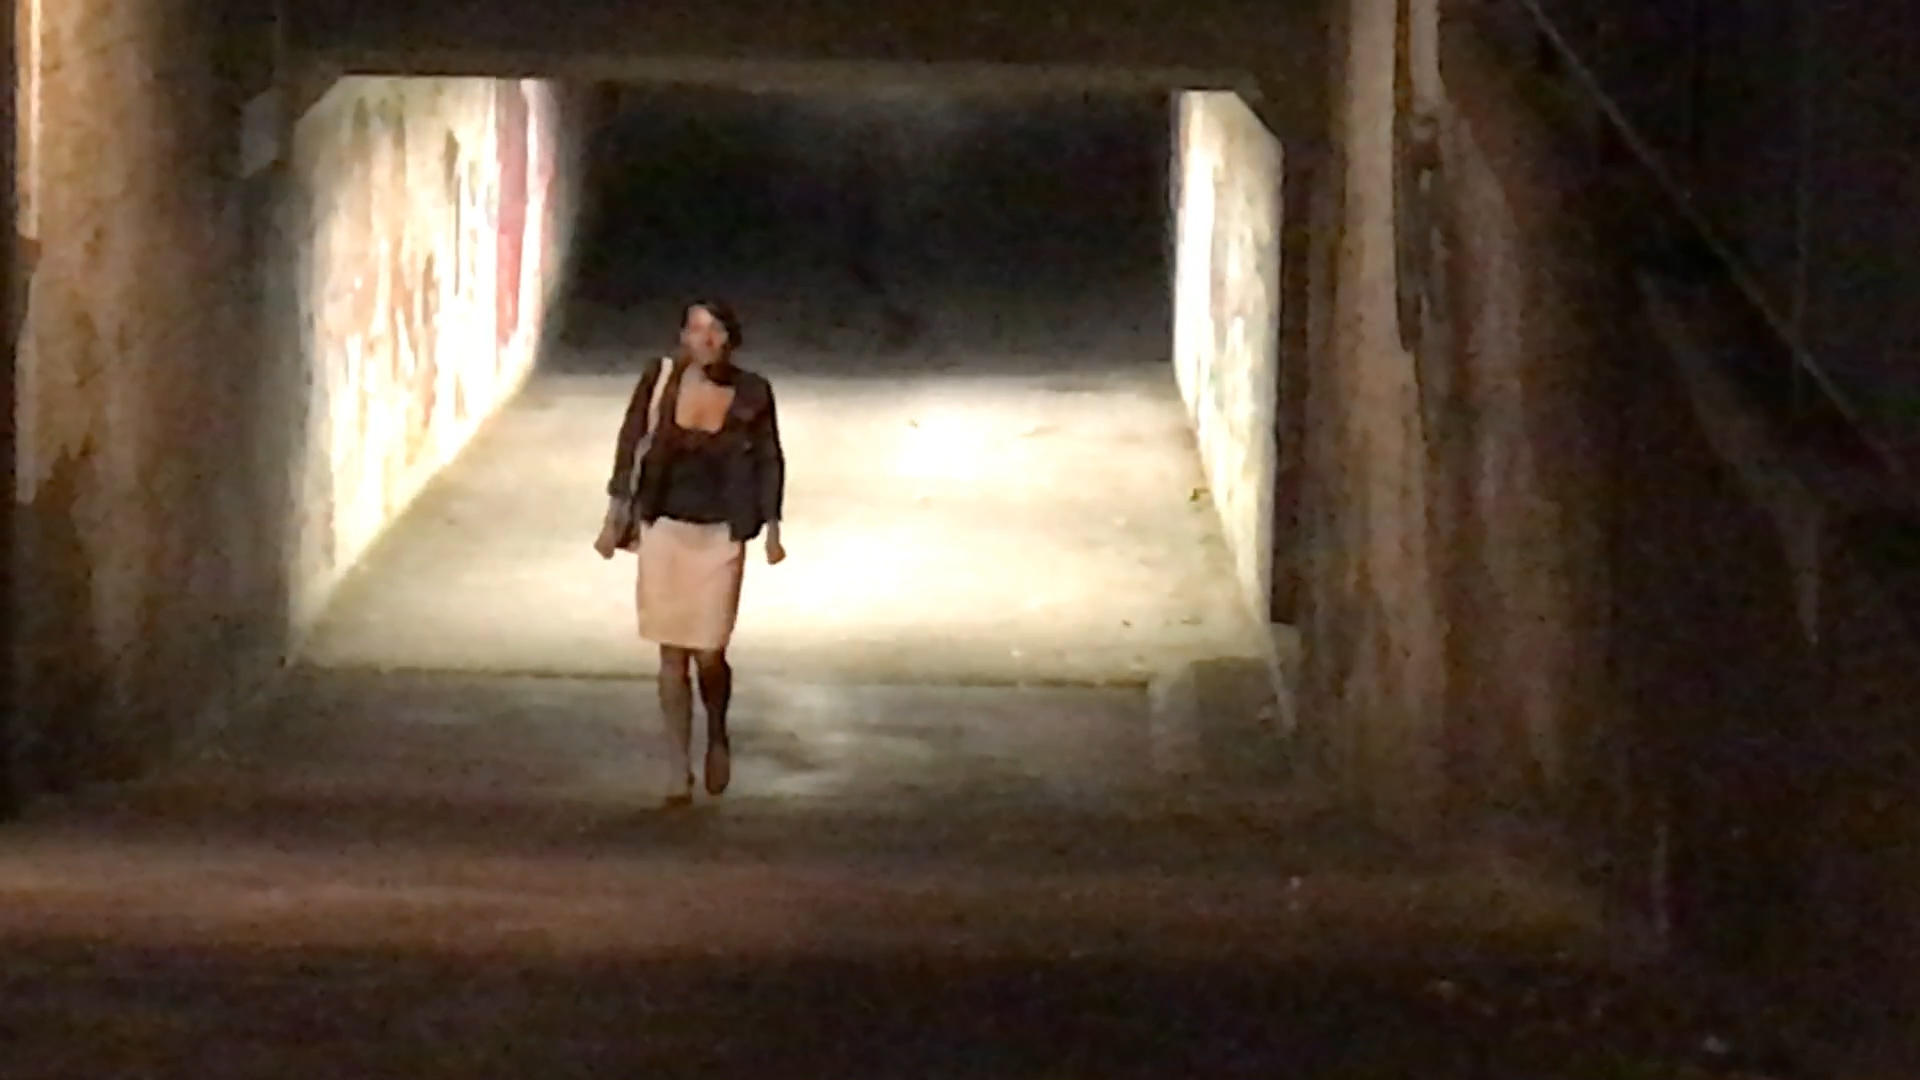 Lady walking through lonely underpass